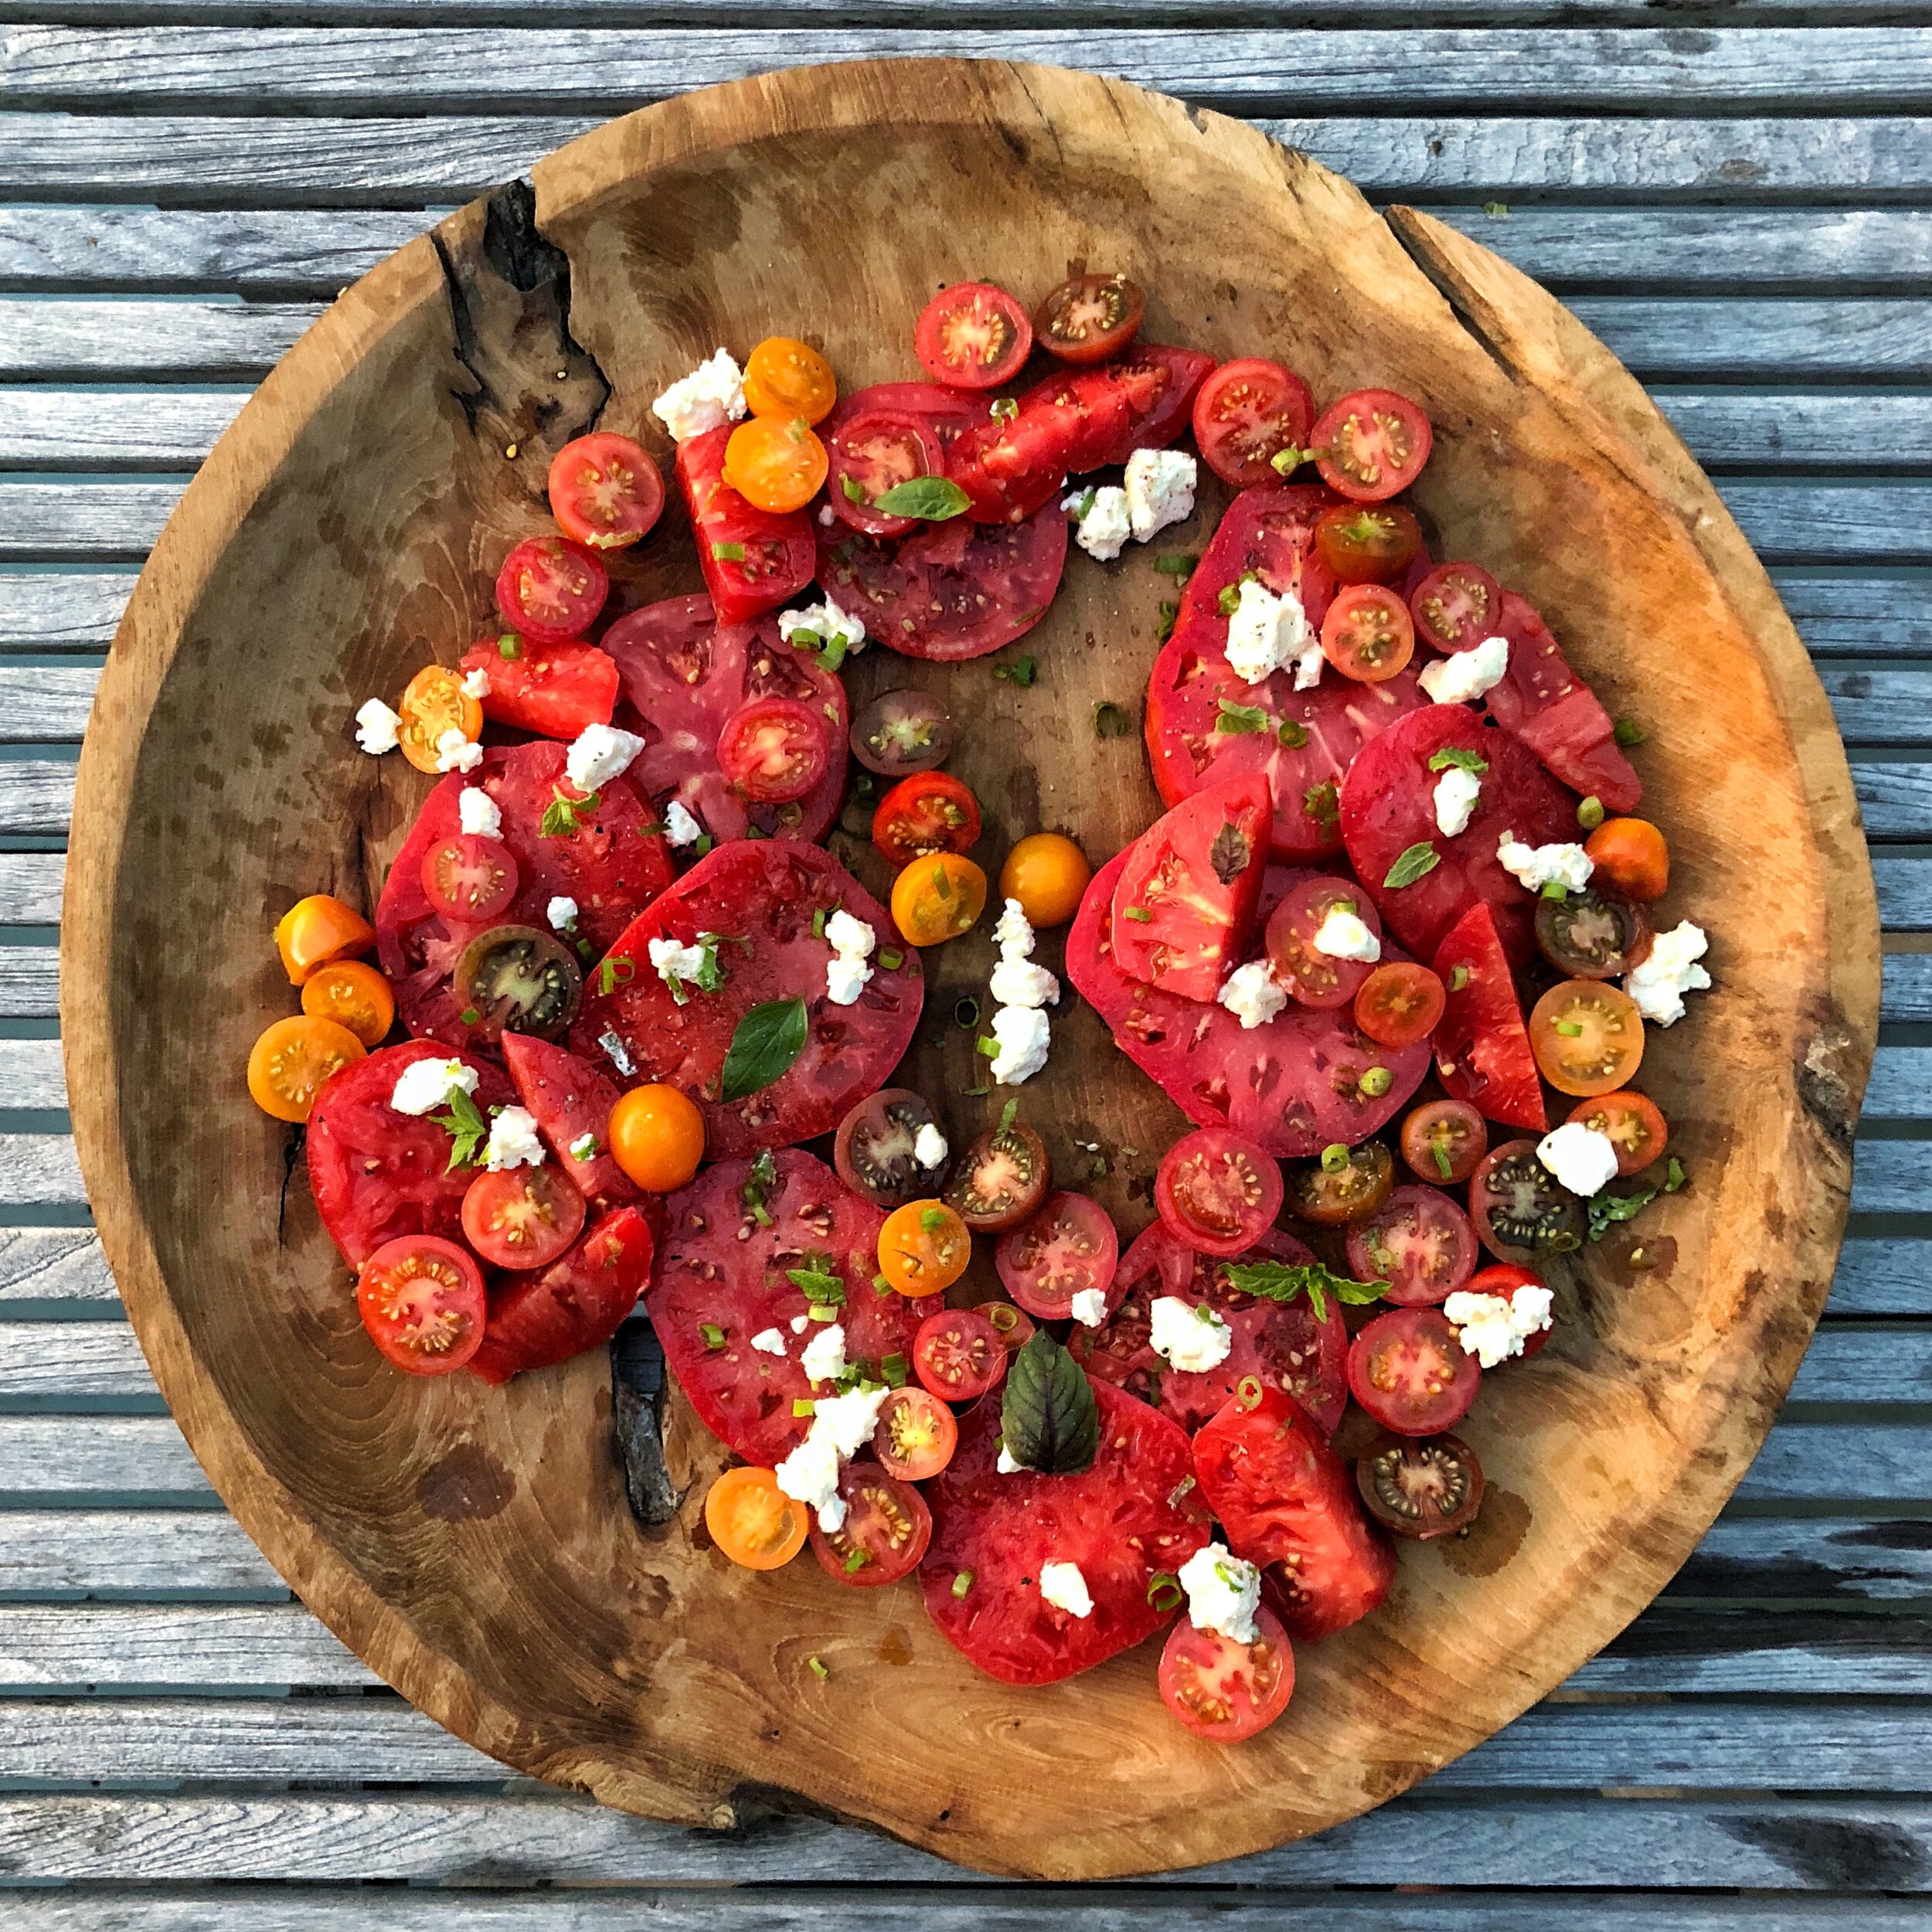 Heirloom Tomato Salad with Feta and Fresh Mint